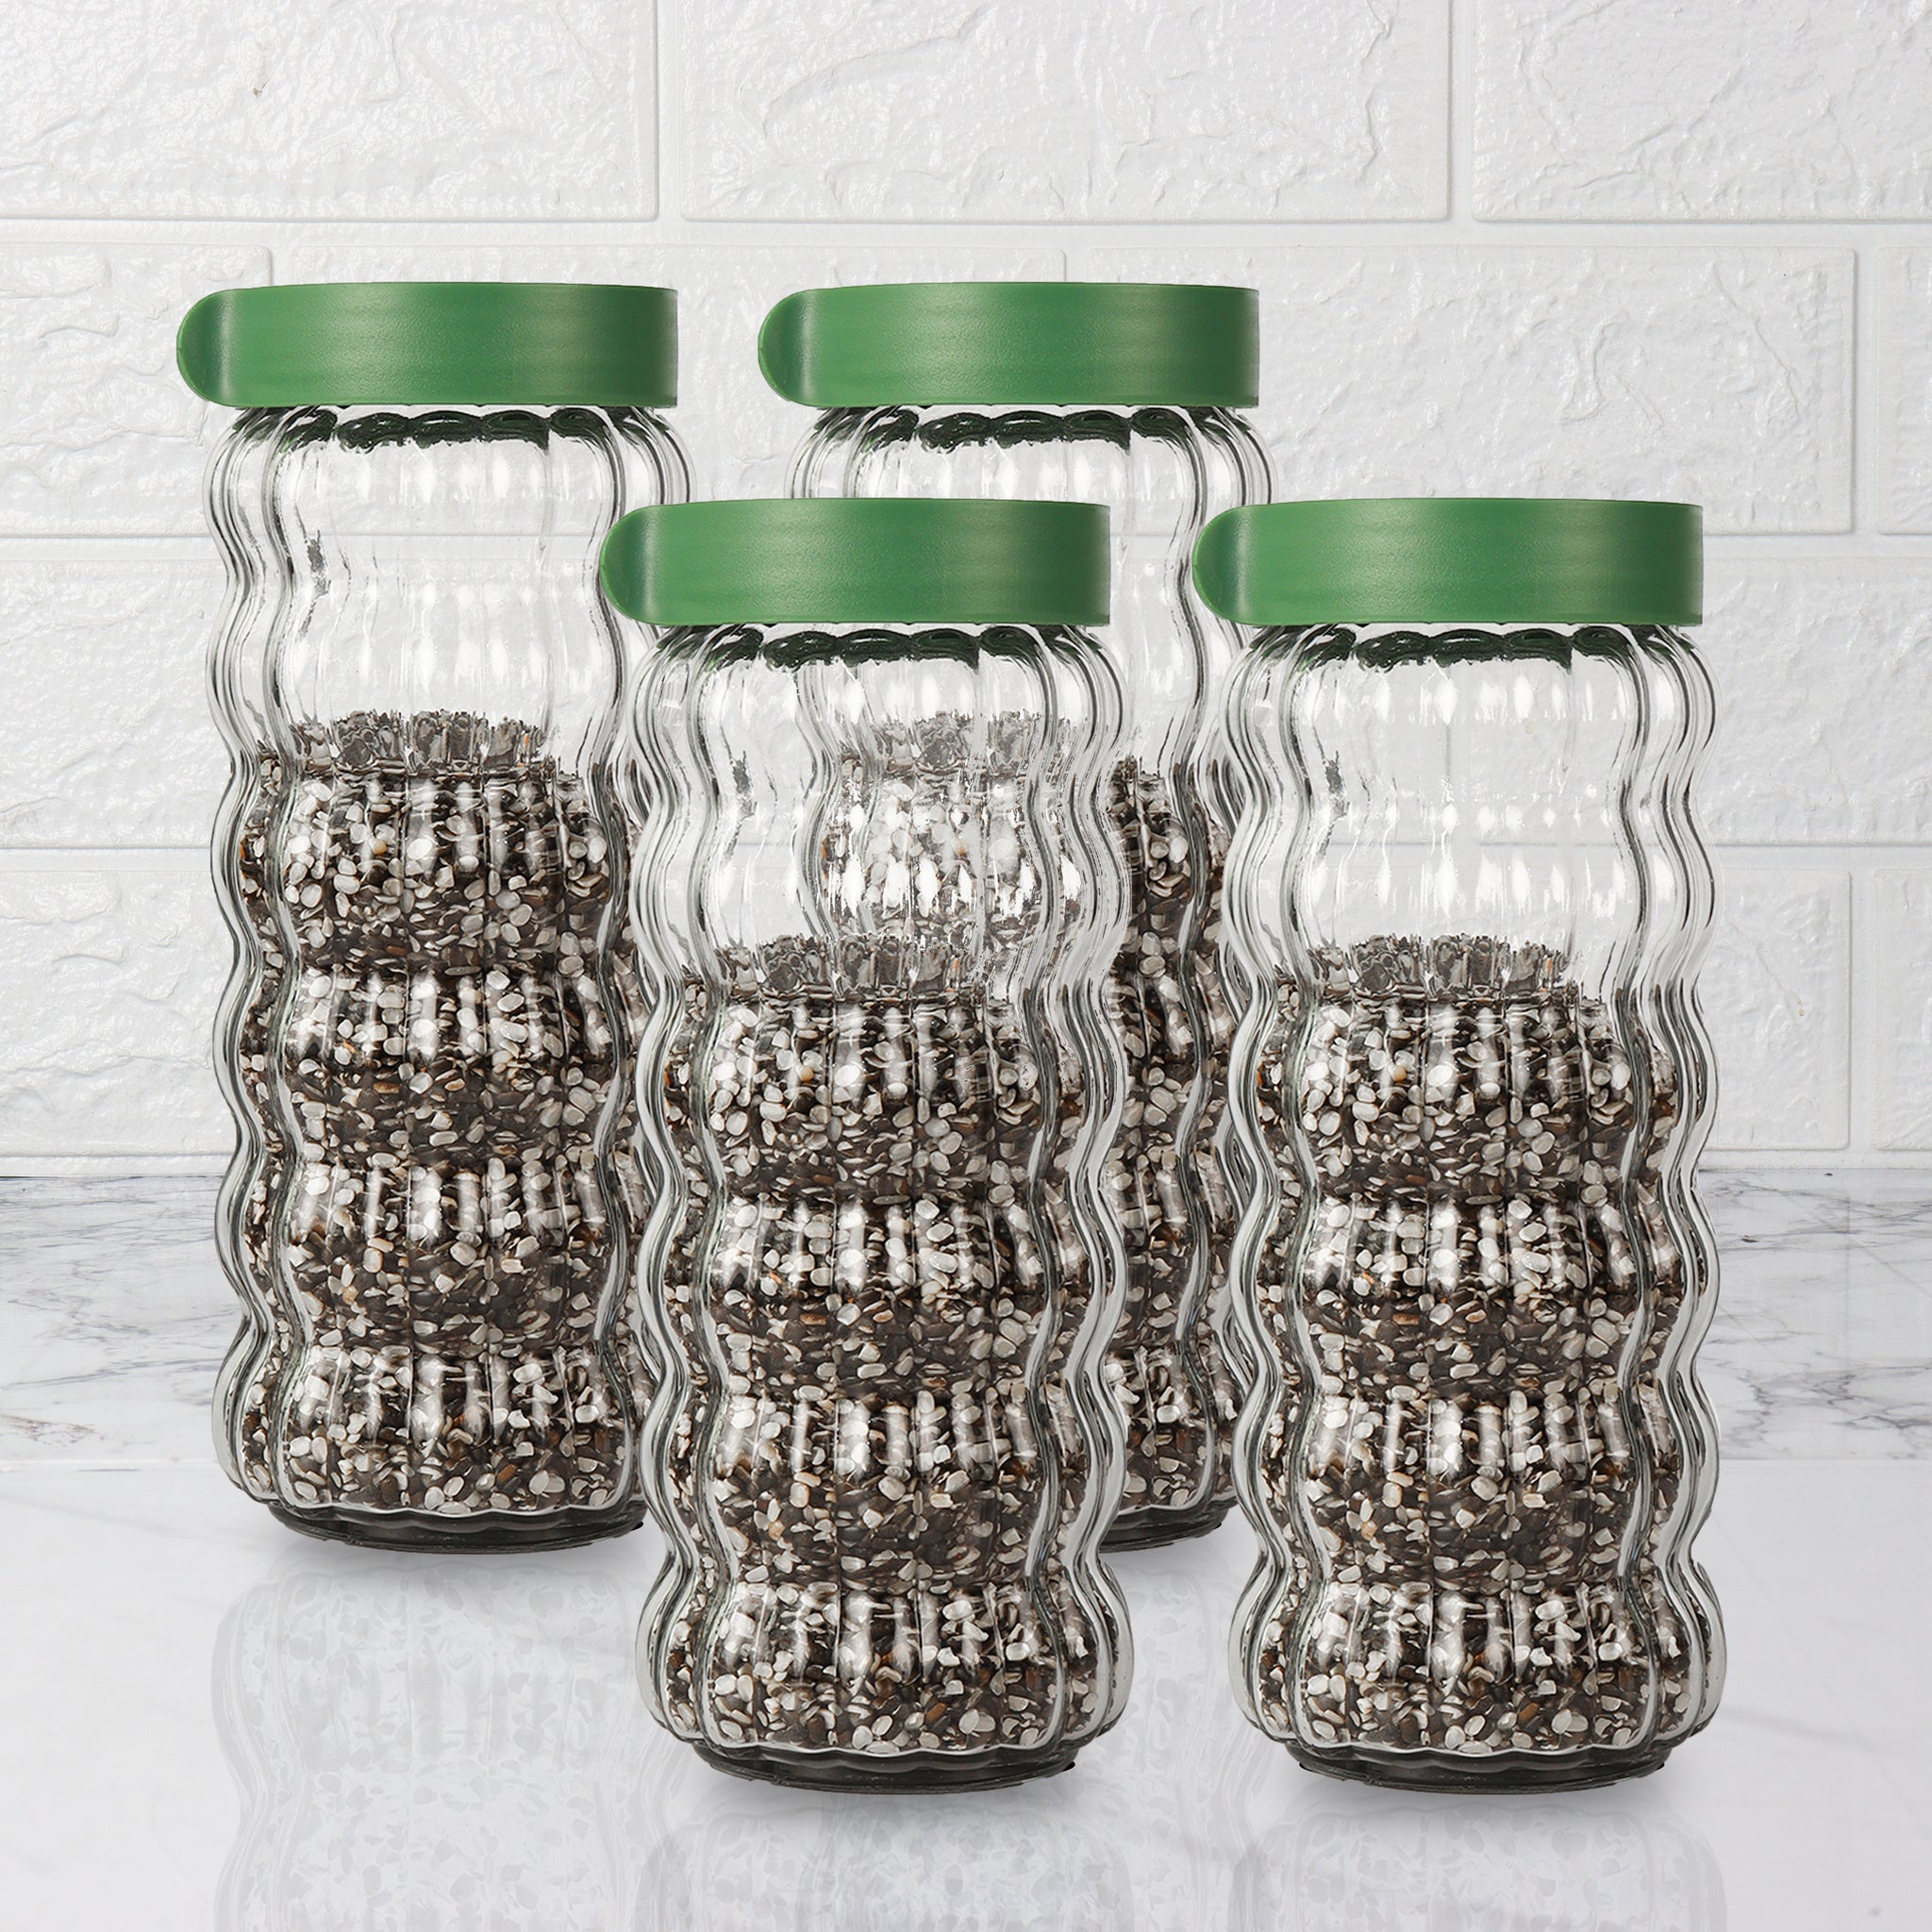 Femora Clear Body Jar with Green Lid - 1000 ML, Set Of 4, Free Replacement of Lids